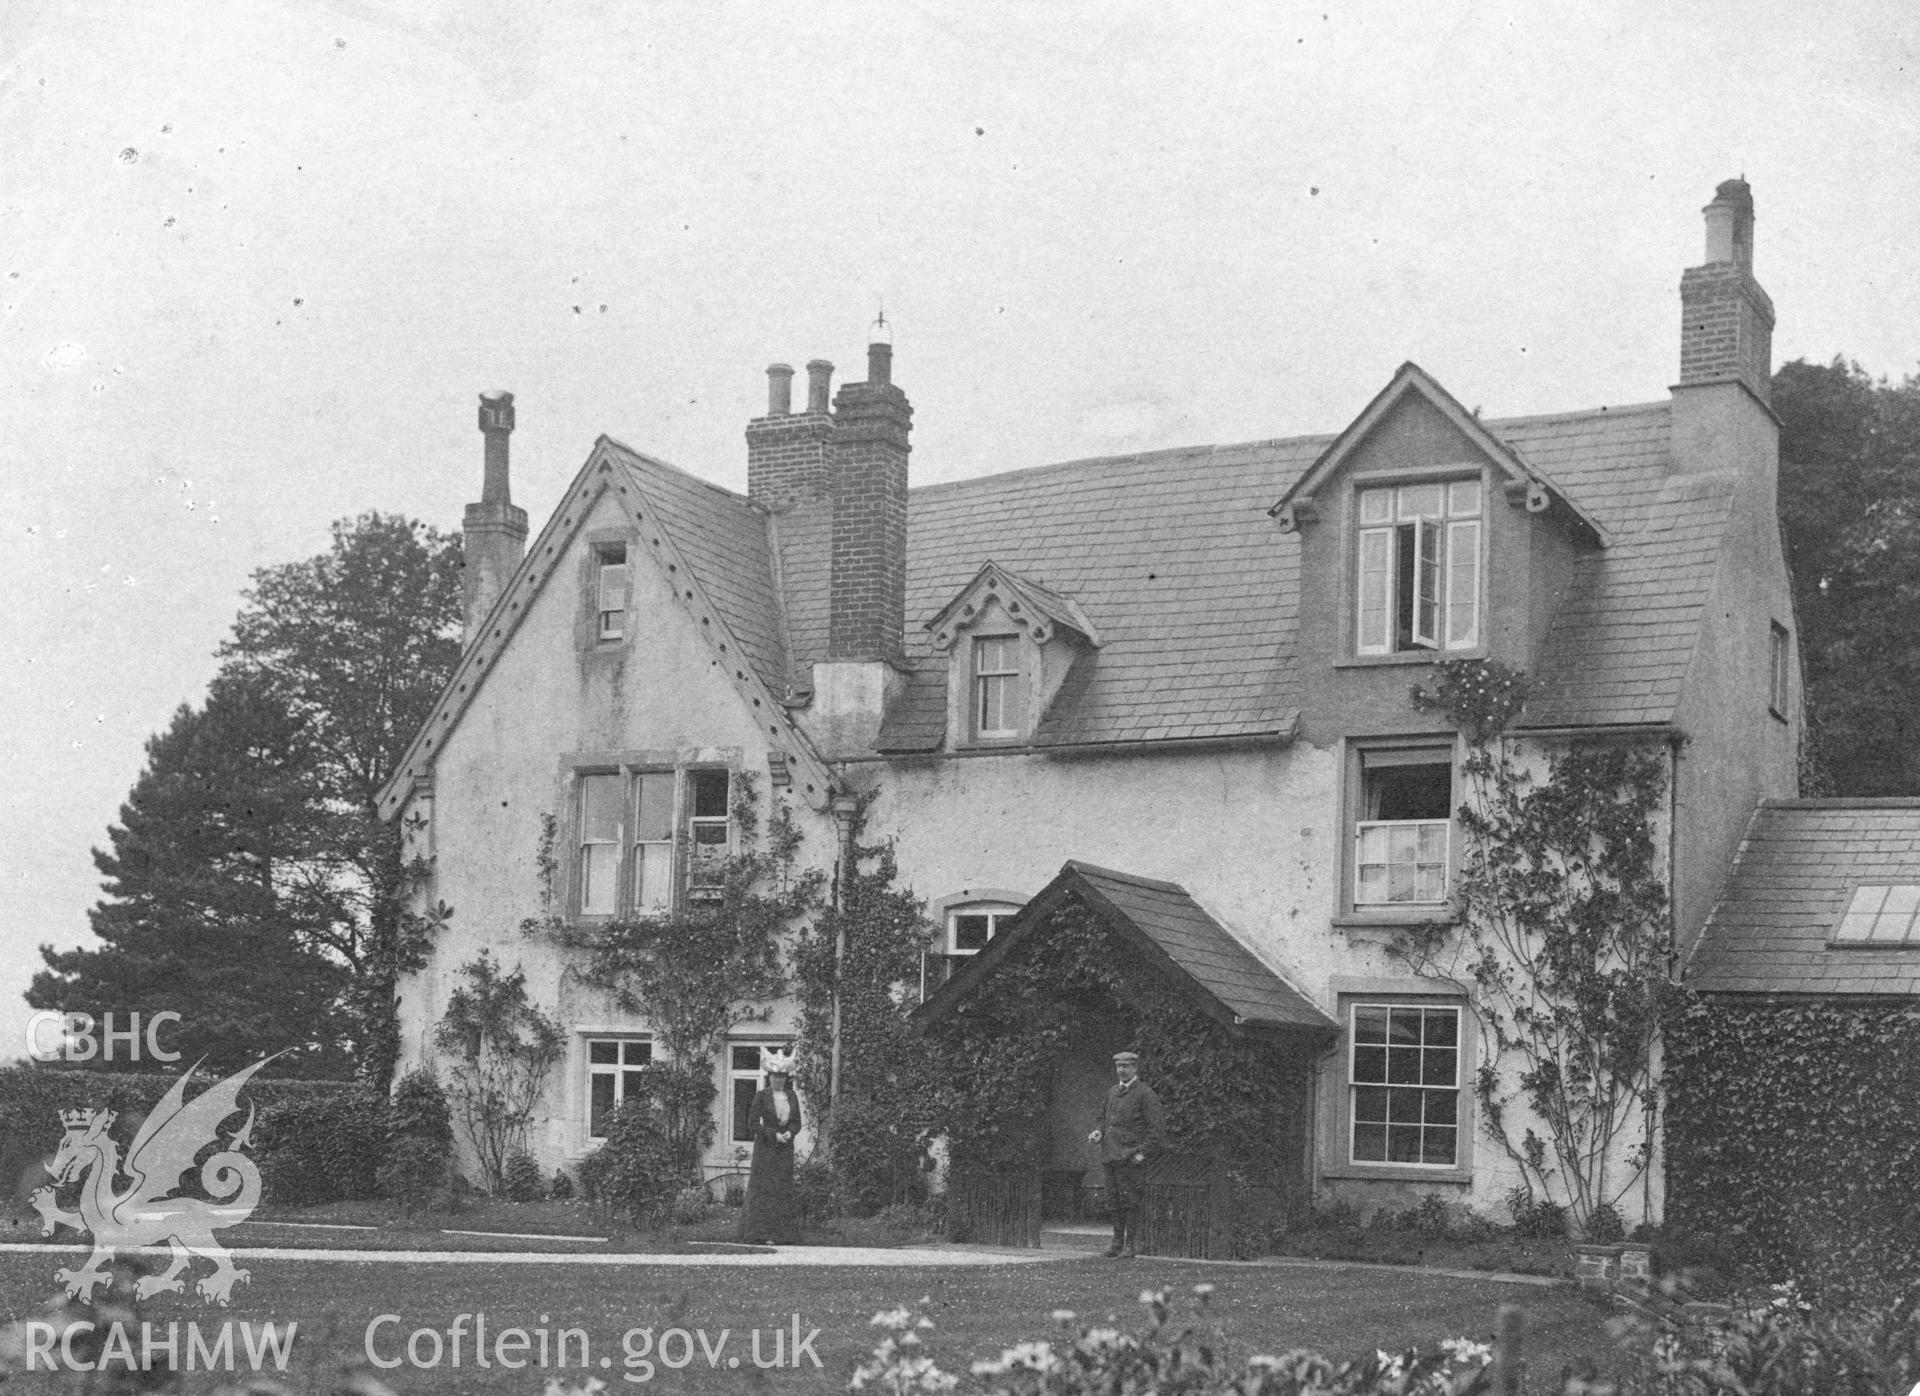 Digital copy of a black and white photograph showing Plas Derwen, January 1902.